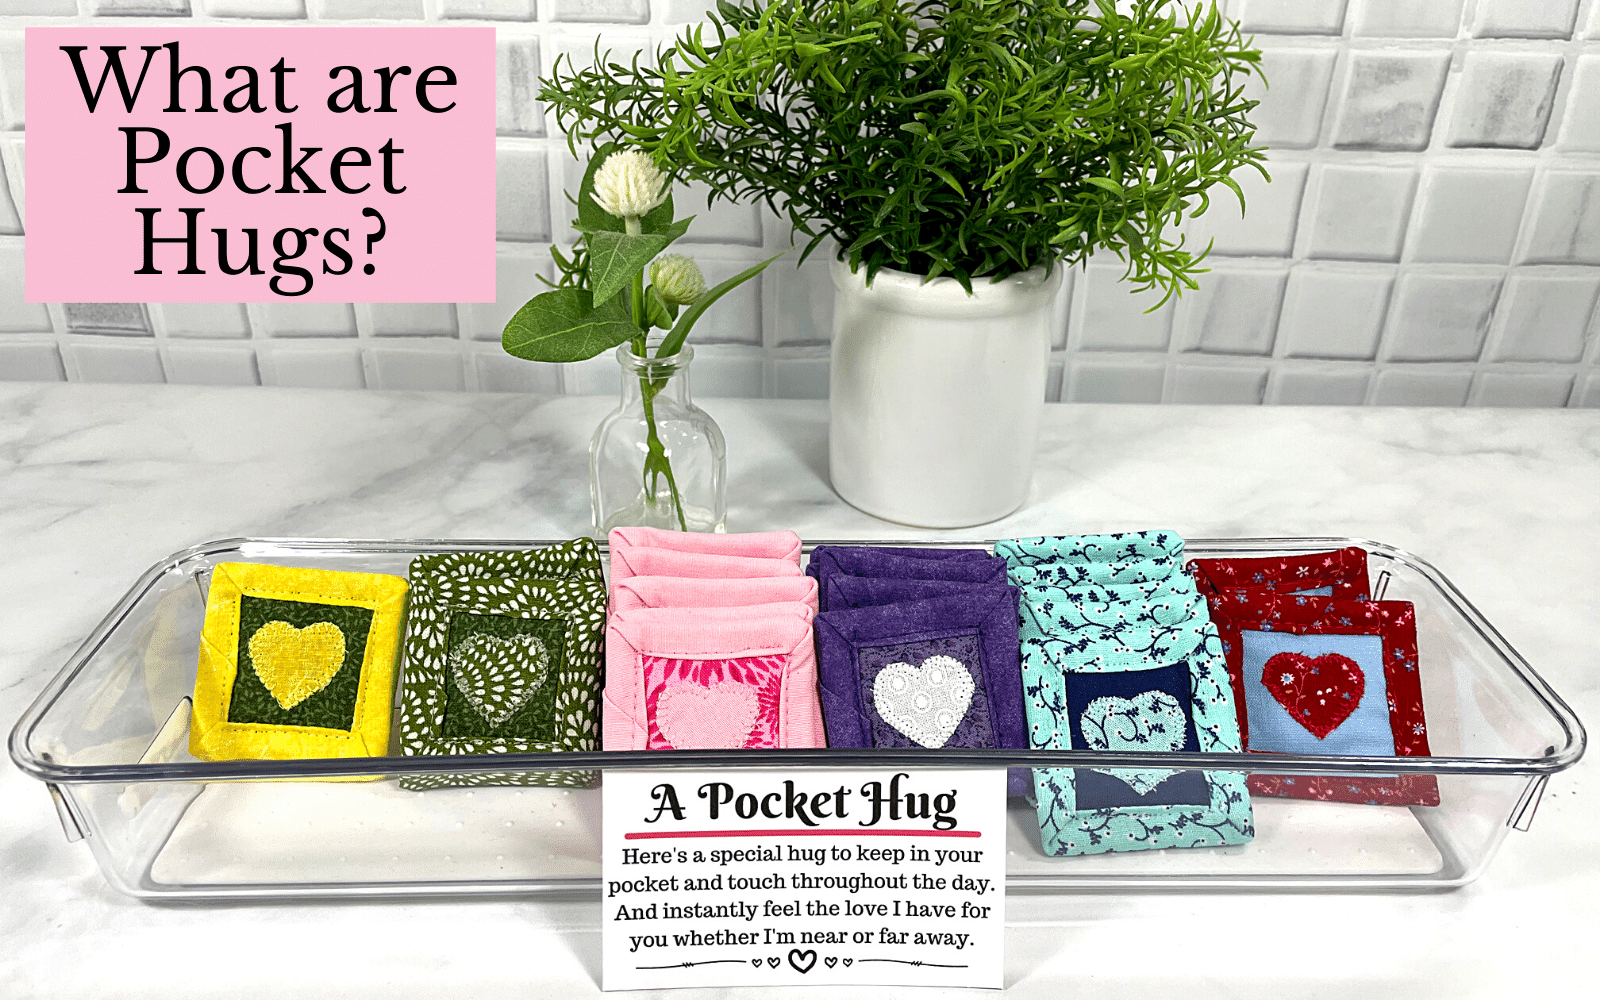 Pocket hugs make a great gift for the one you love.  Kids, the elderly and any age in between would love receiving a token of your love.  Each one comes with a poem card too.